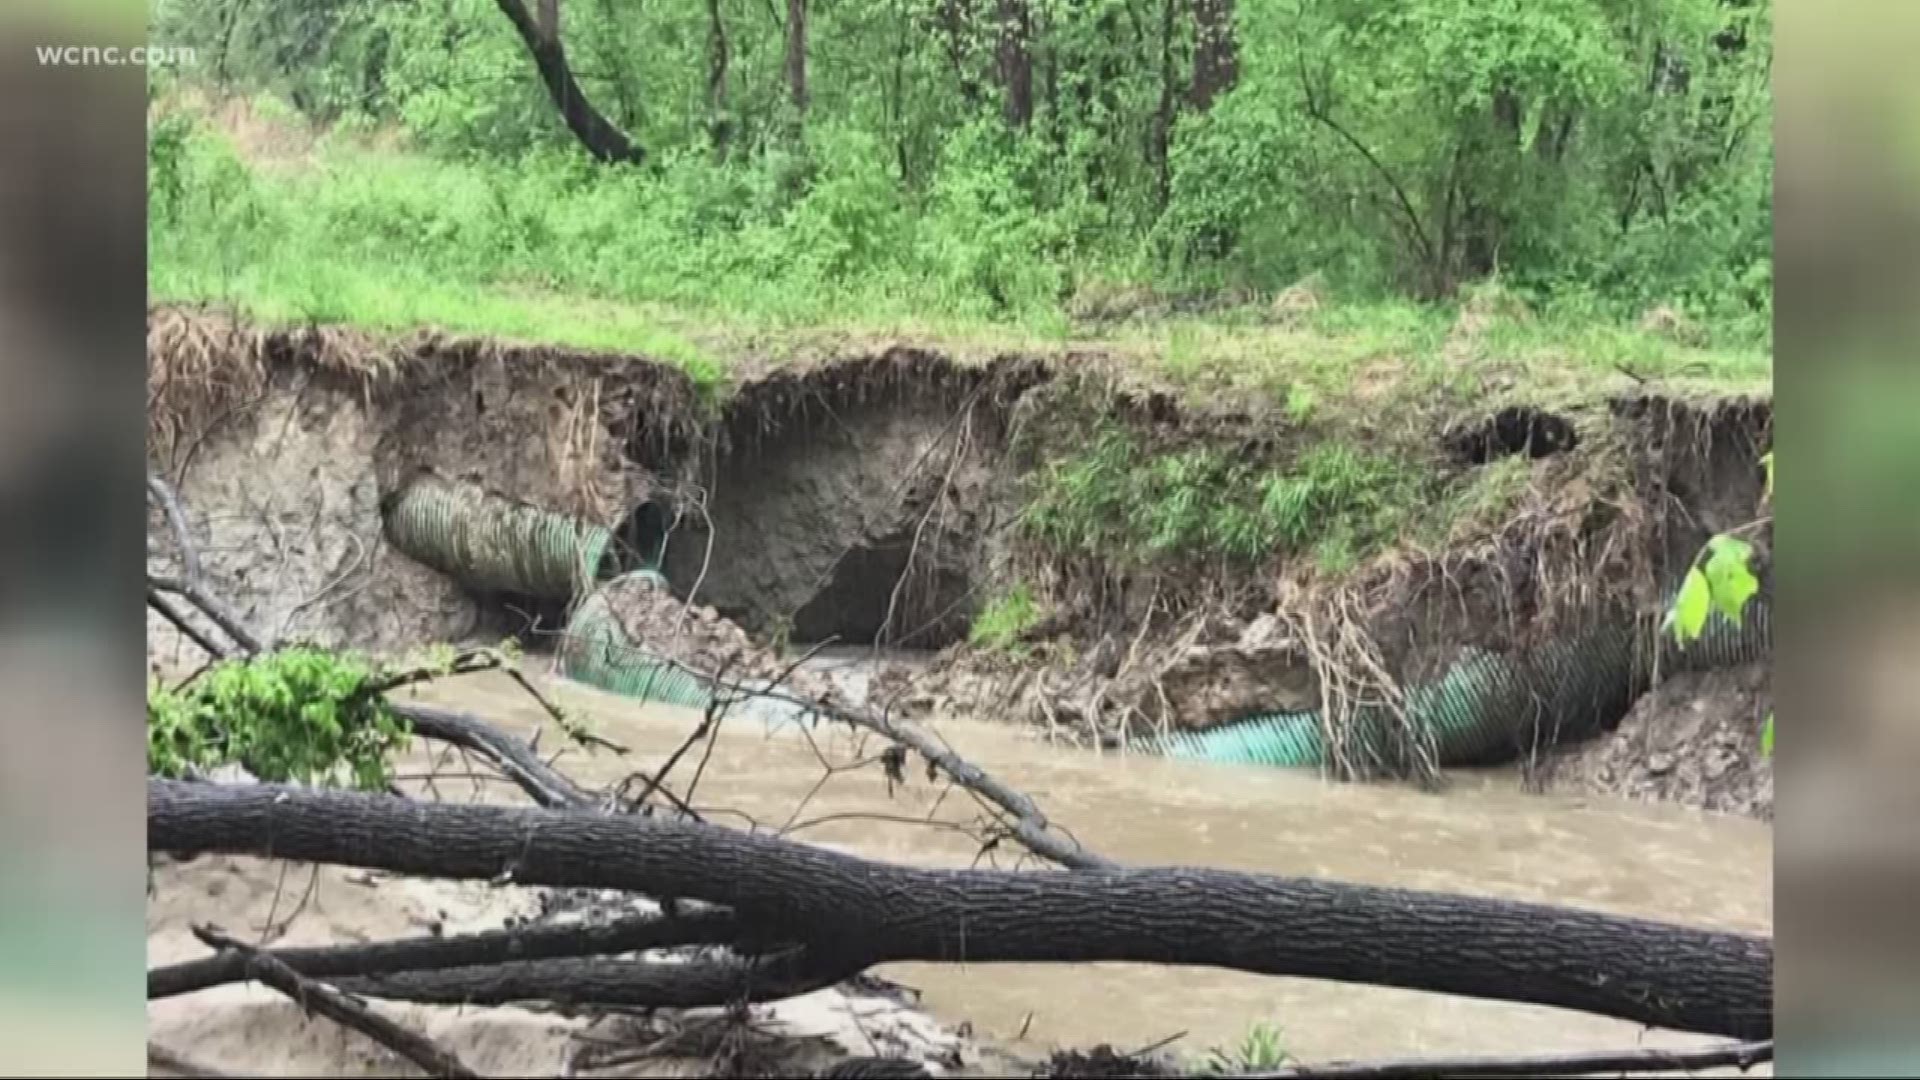 Charlotte Water said a downed tree from torrential rains led to a broken pipe and millions of gallons of sewage being spilled into a local creek.